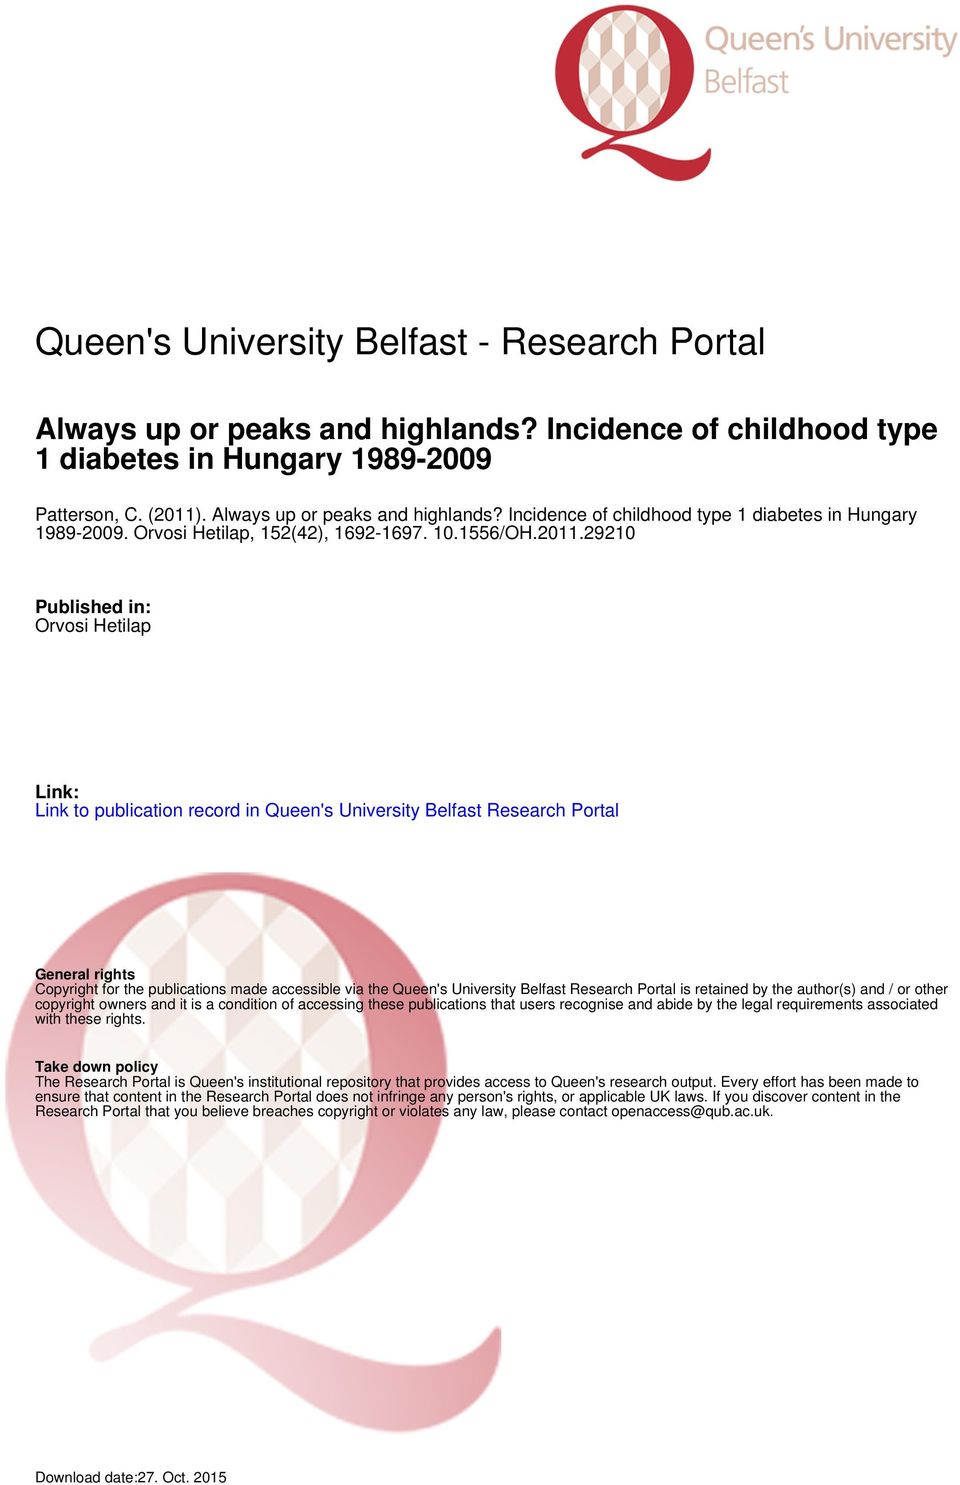 29210 Published in: Orvosi Hetilap Link: Link to publication record in Queen's University Belfast Research Portal General rights Copyright for the publications made accessible via the Queen's